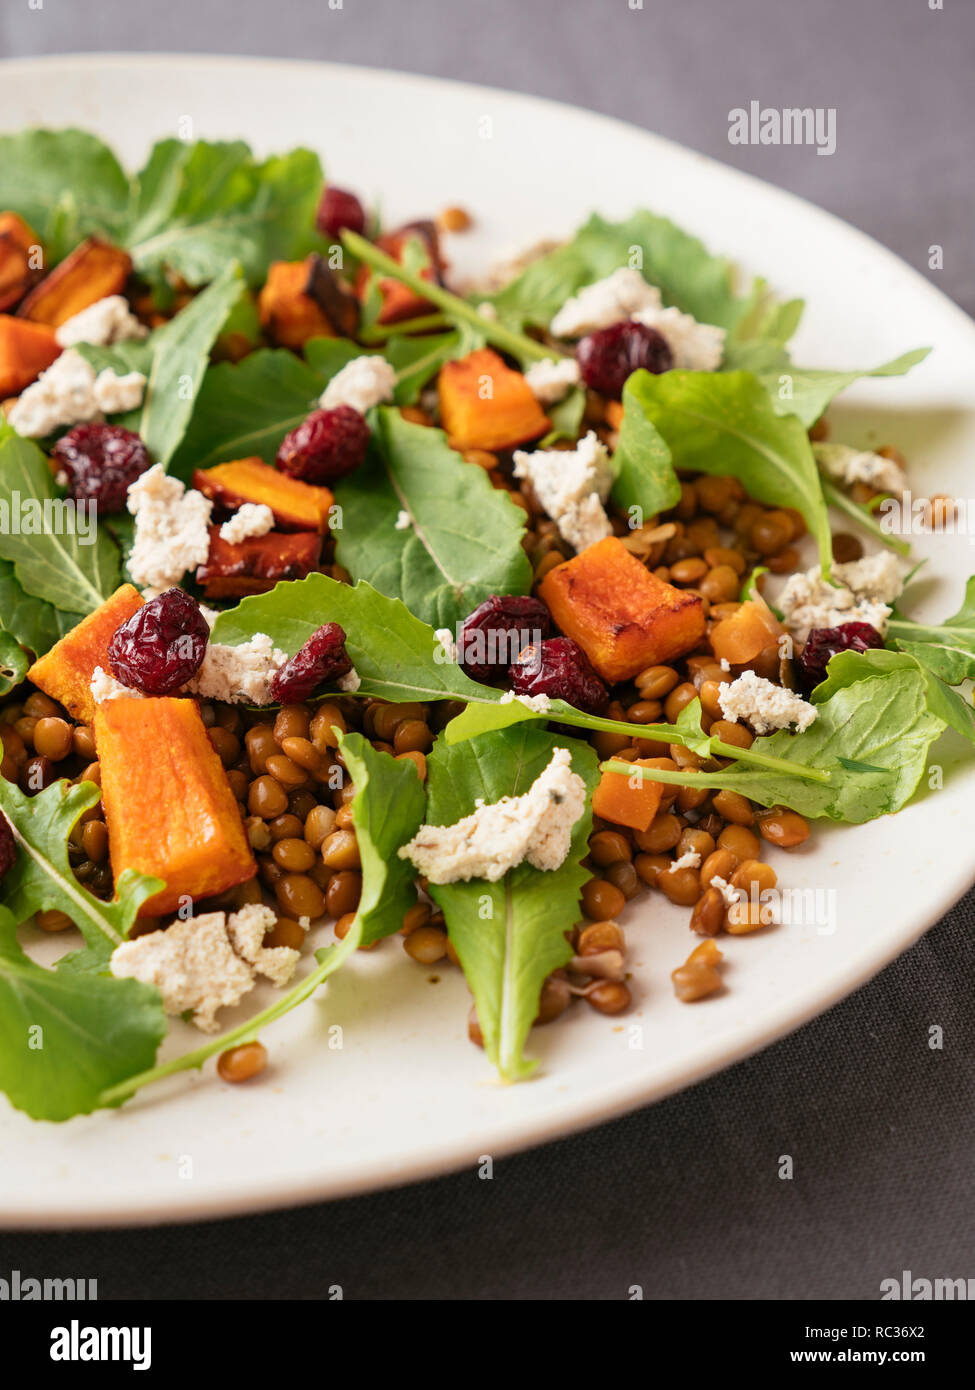 Plate with a lentil, winter squash salad with home made vegan feta Stock Photo